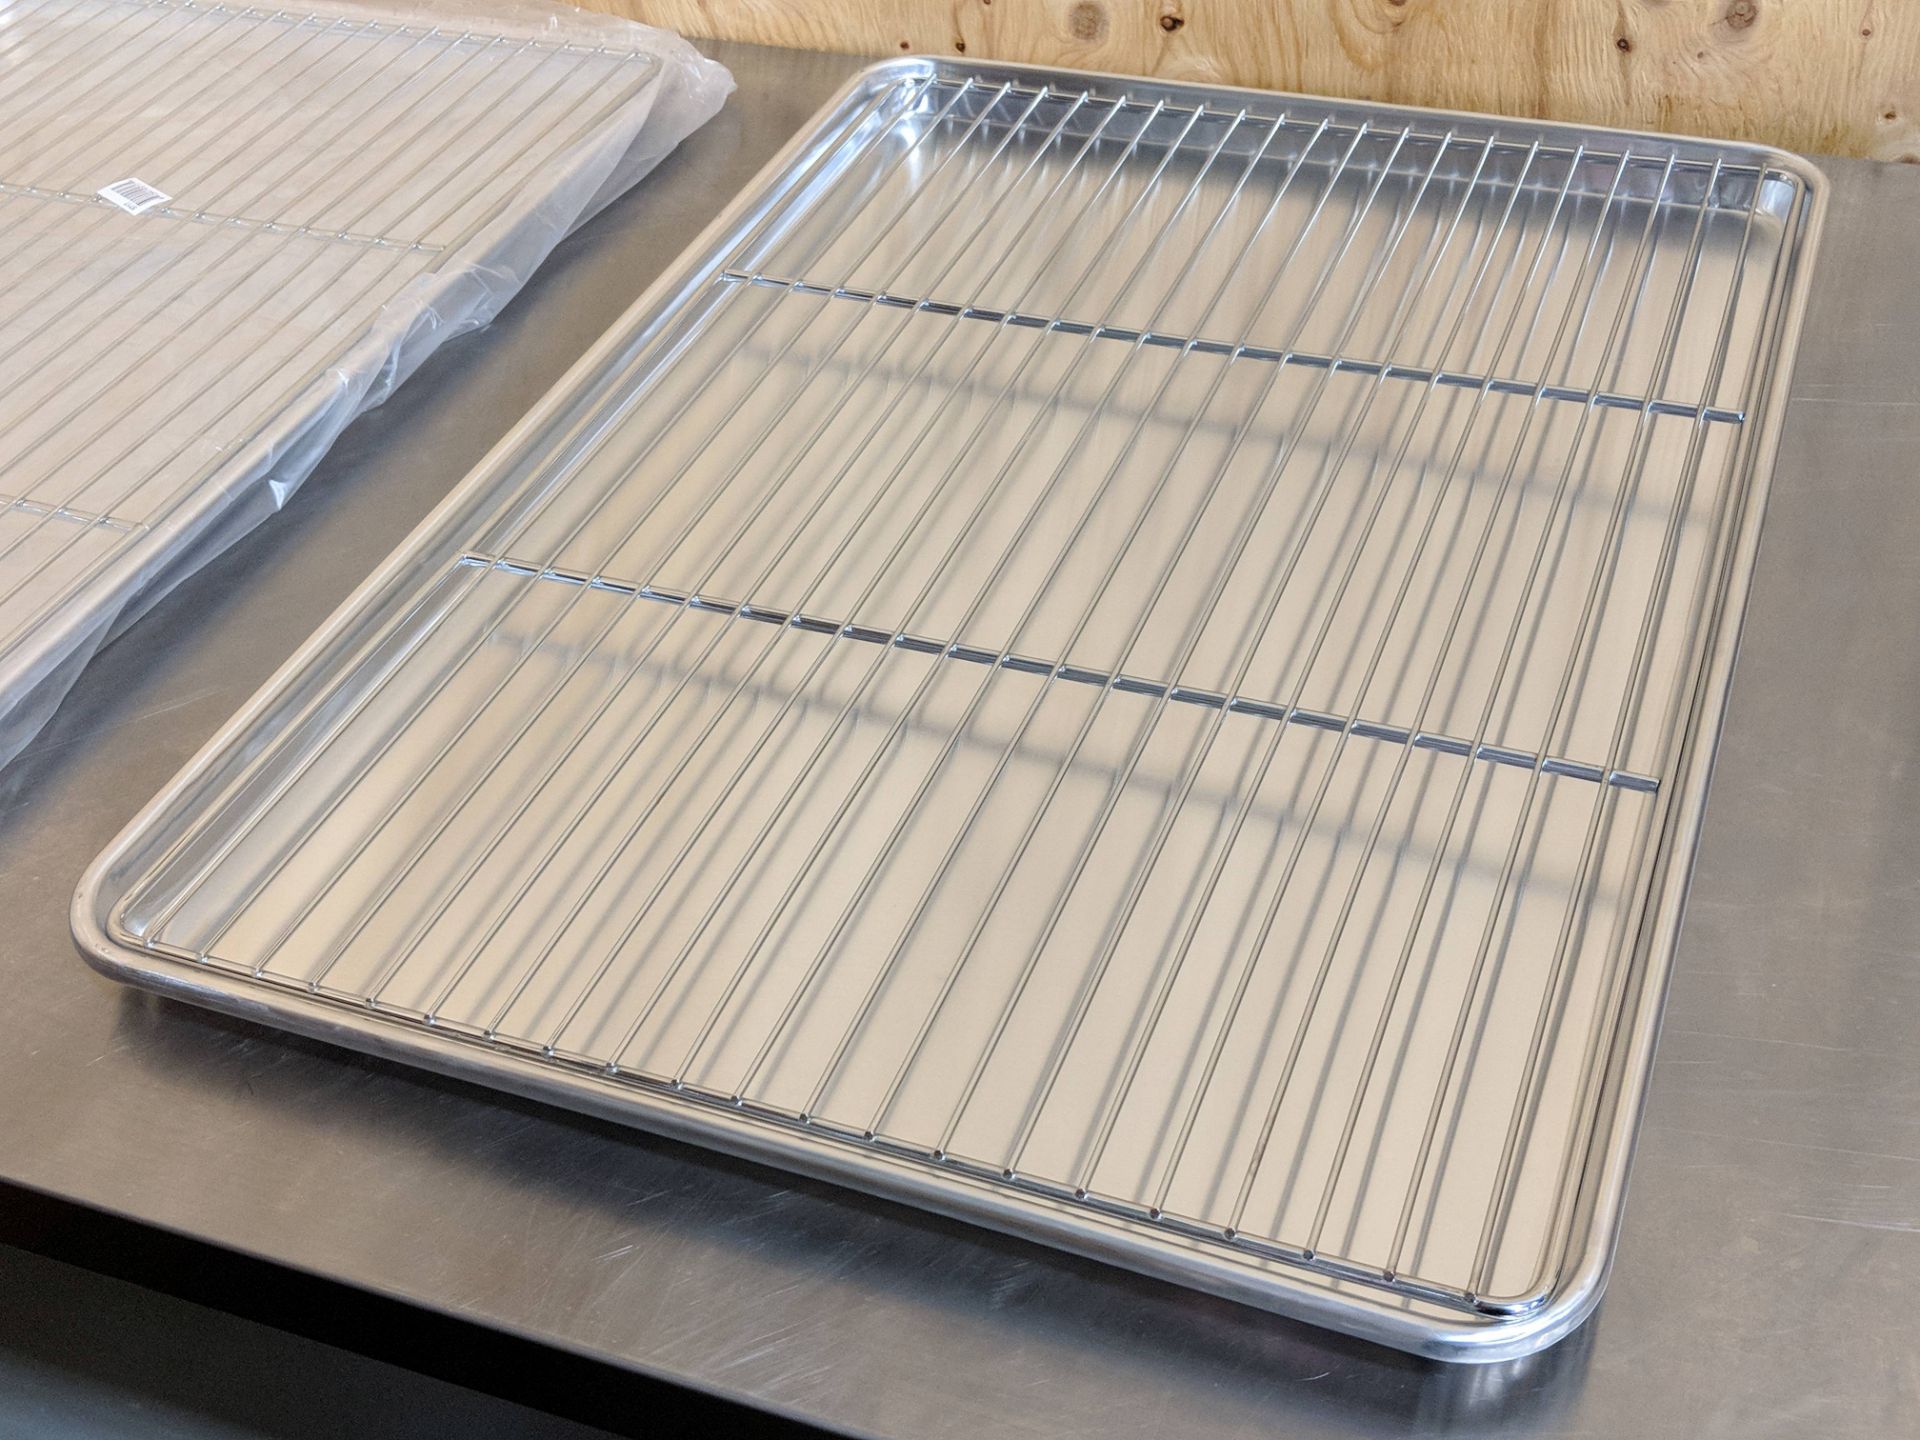 Full Size Bun Pan with Flat Stainless Rack - Lot of 2 Pieces